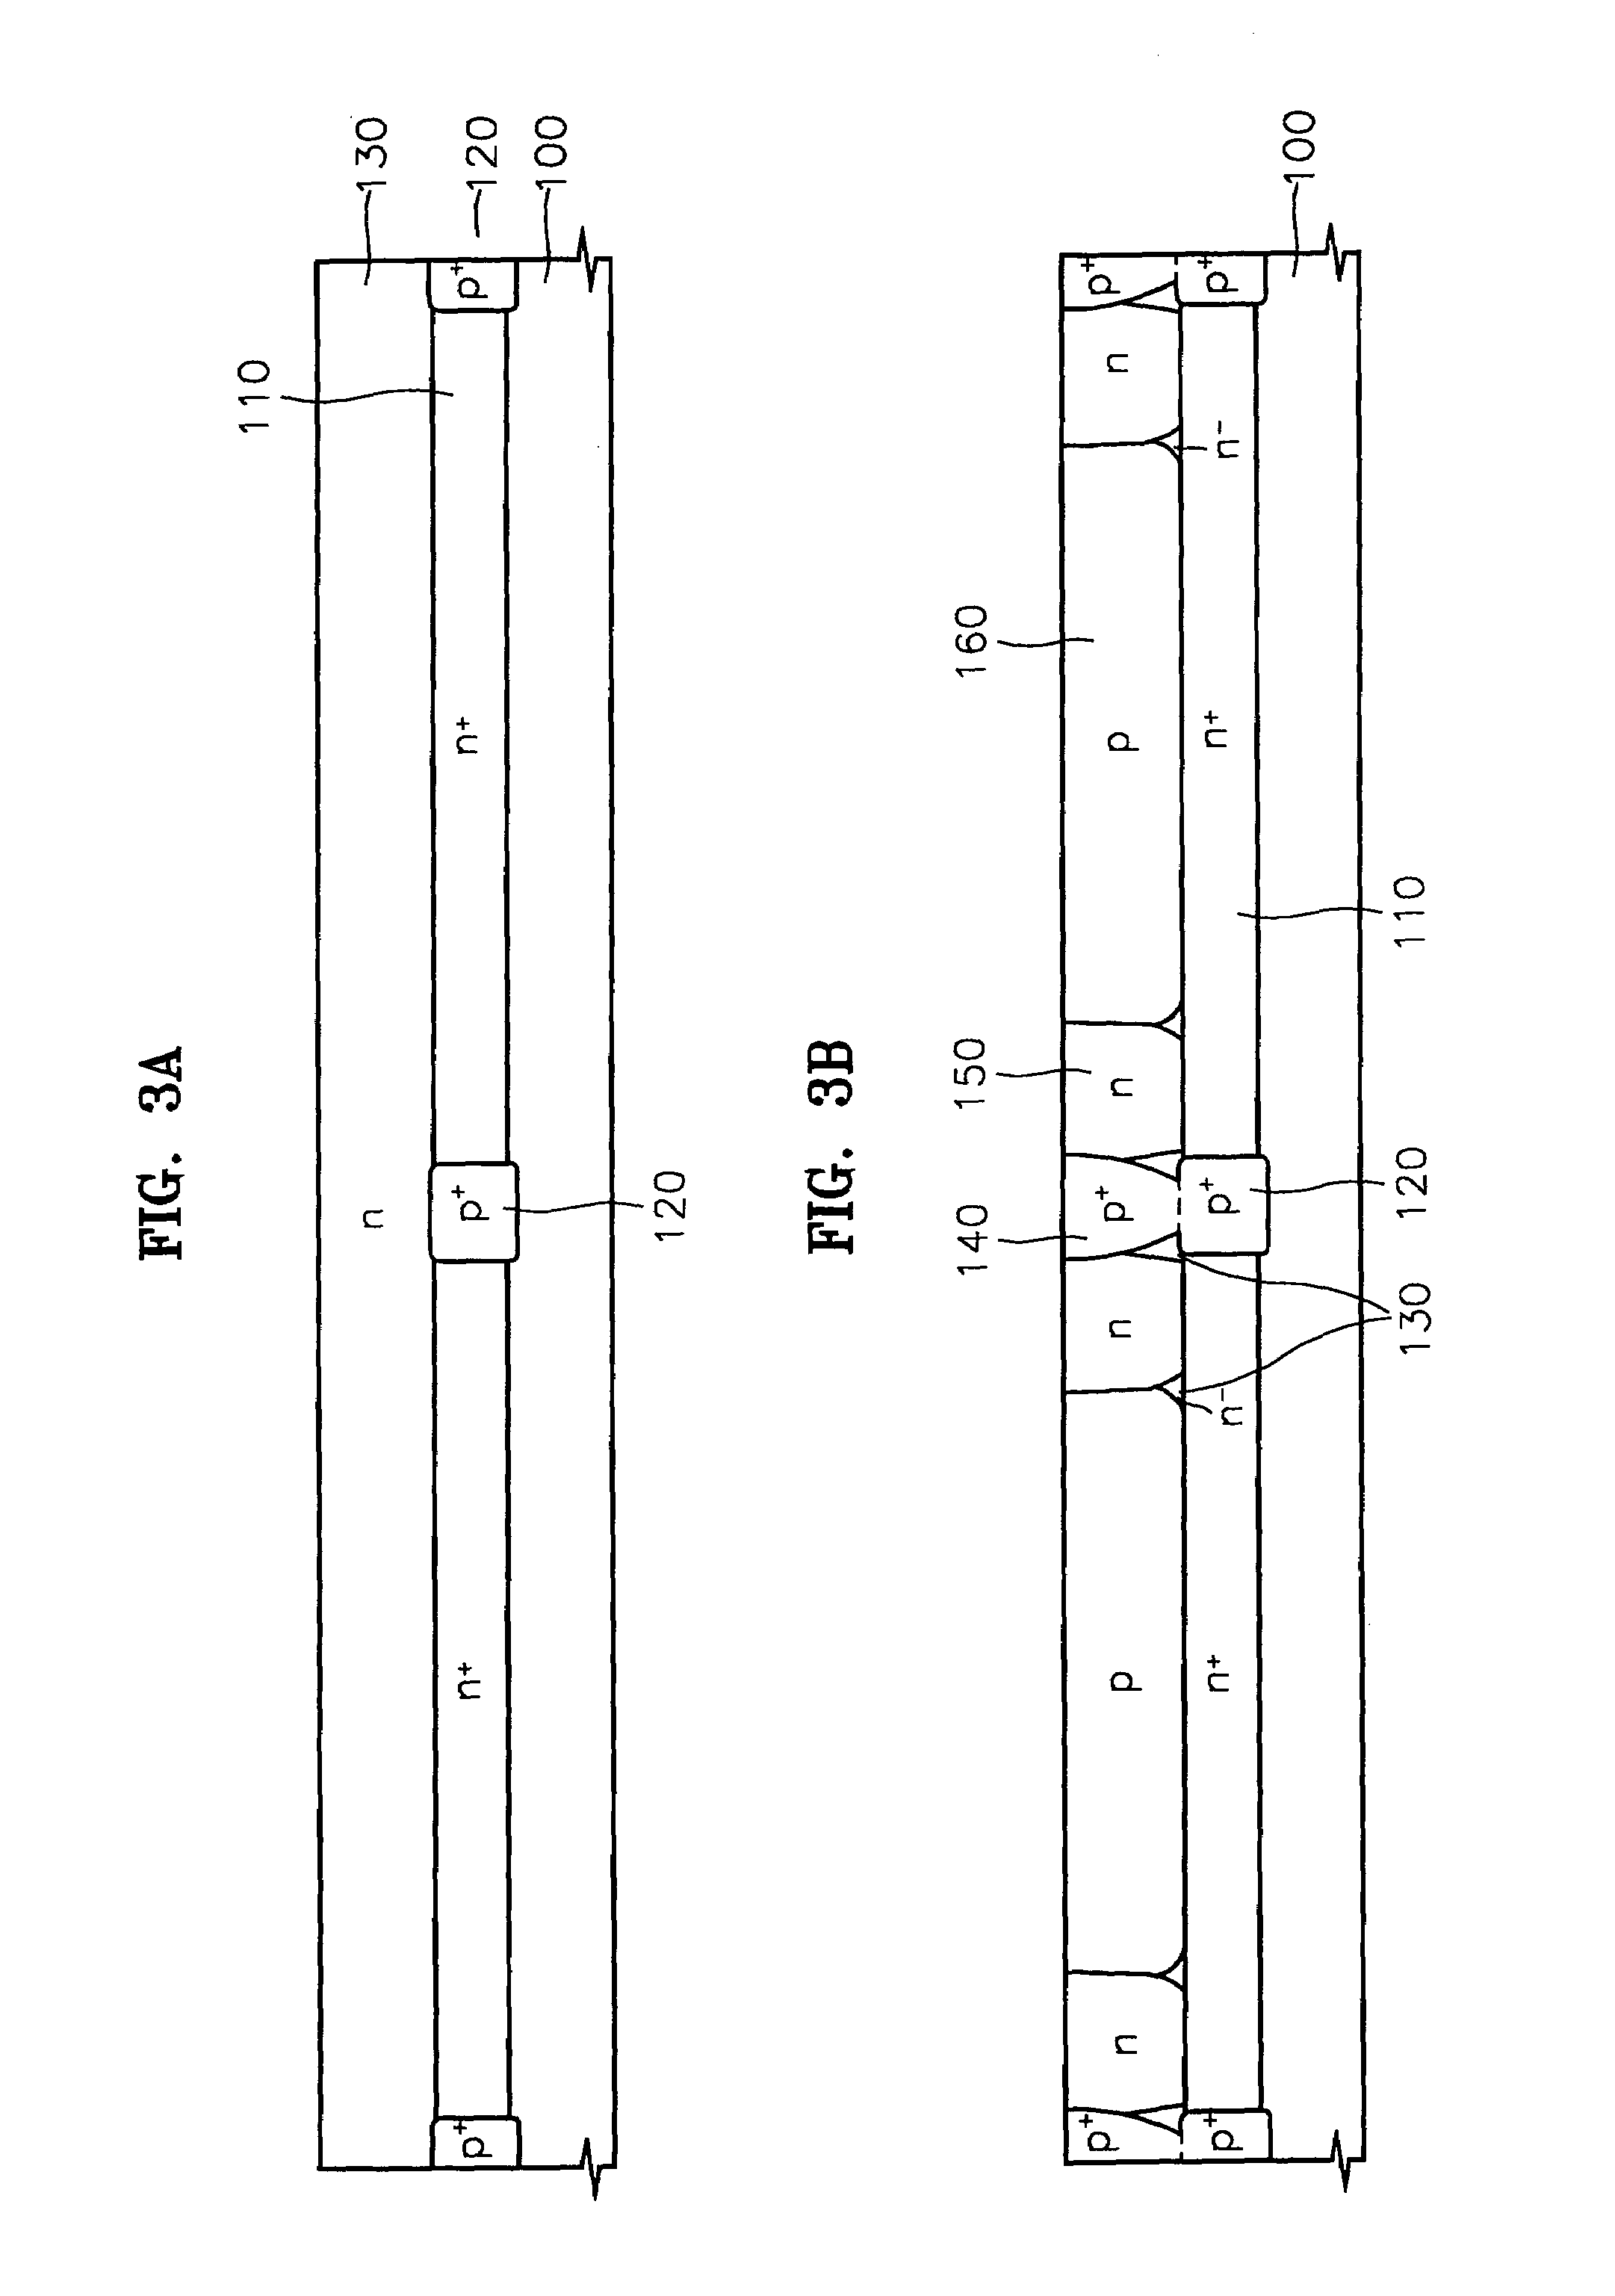 Reduced surface field technique for semiconductor devices